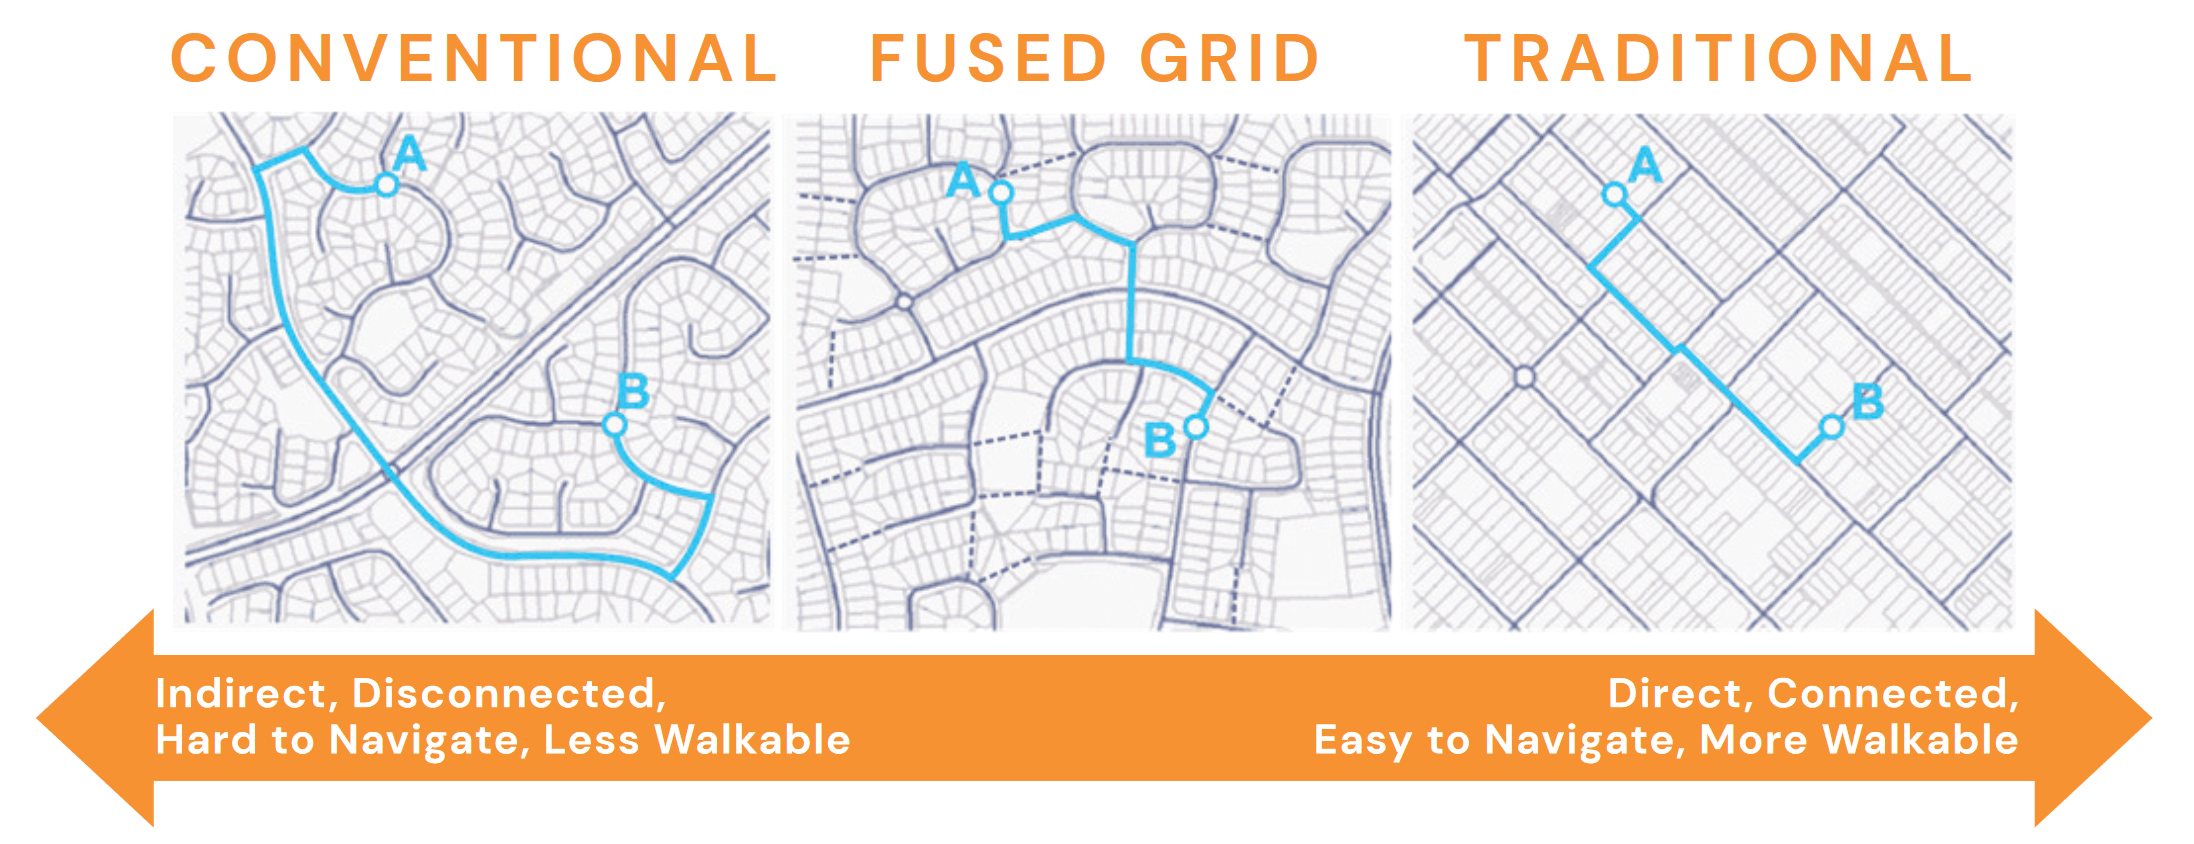 Comparison between different street layouts vs. ease of navigation. (City of Nanaimo)